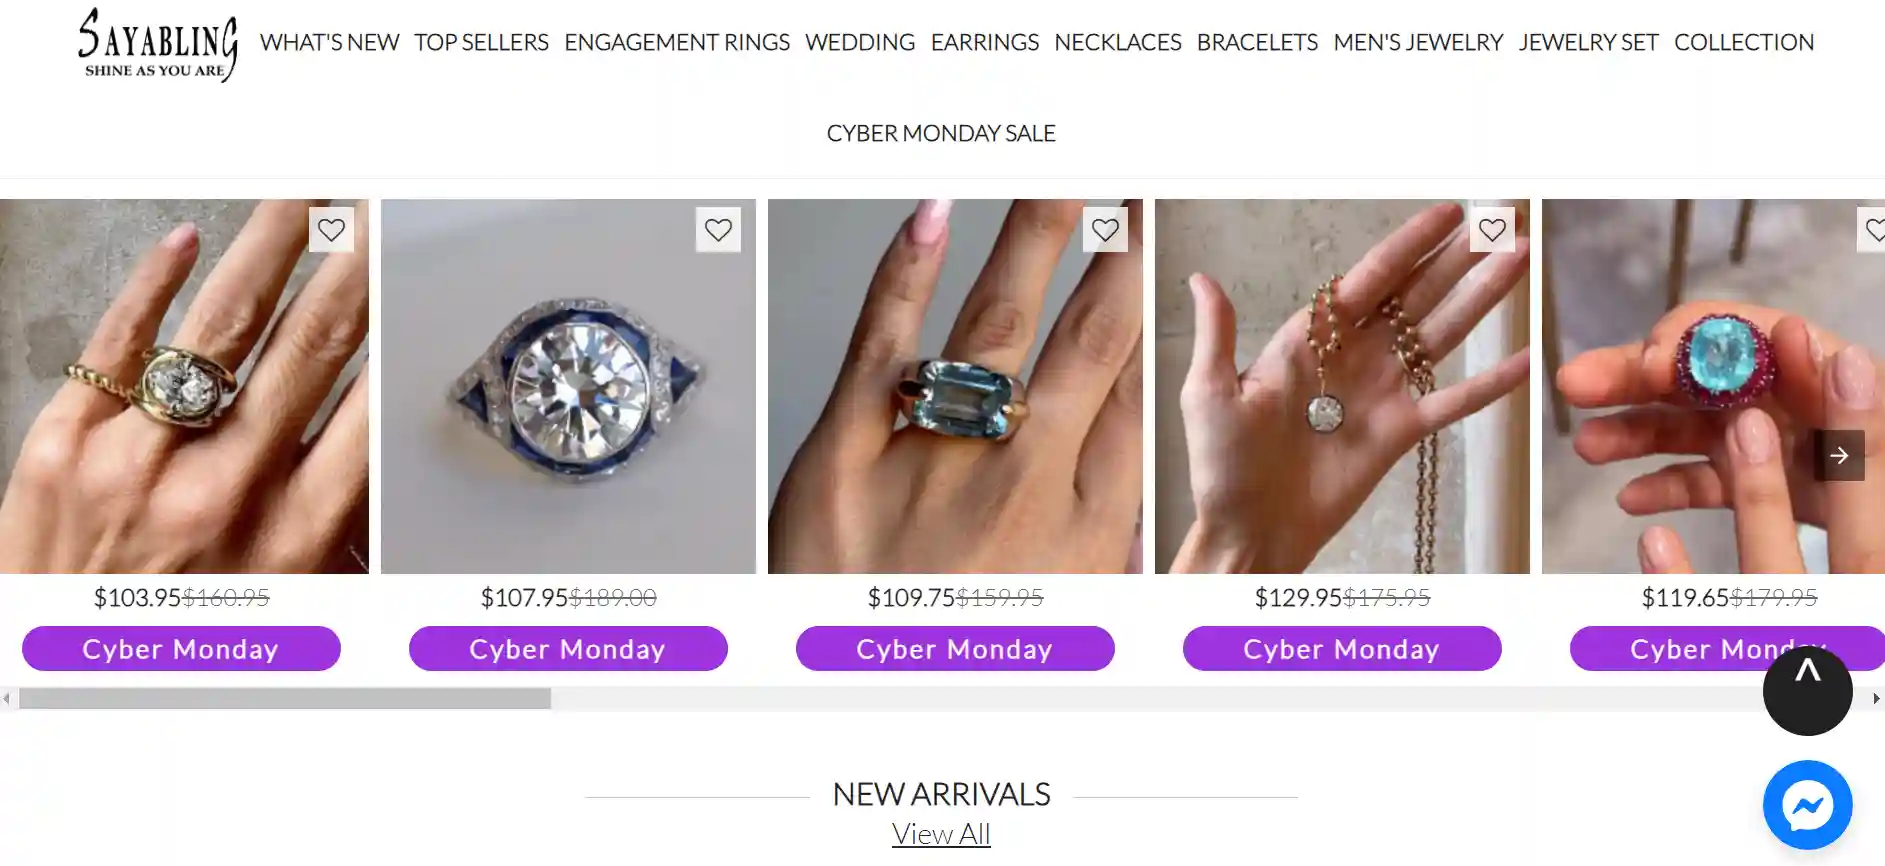 You are currently viewing Sayabling Jewelry Reviews – Should You Try This?